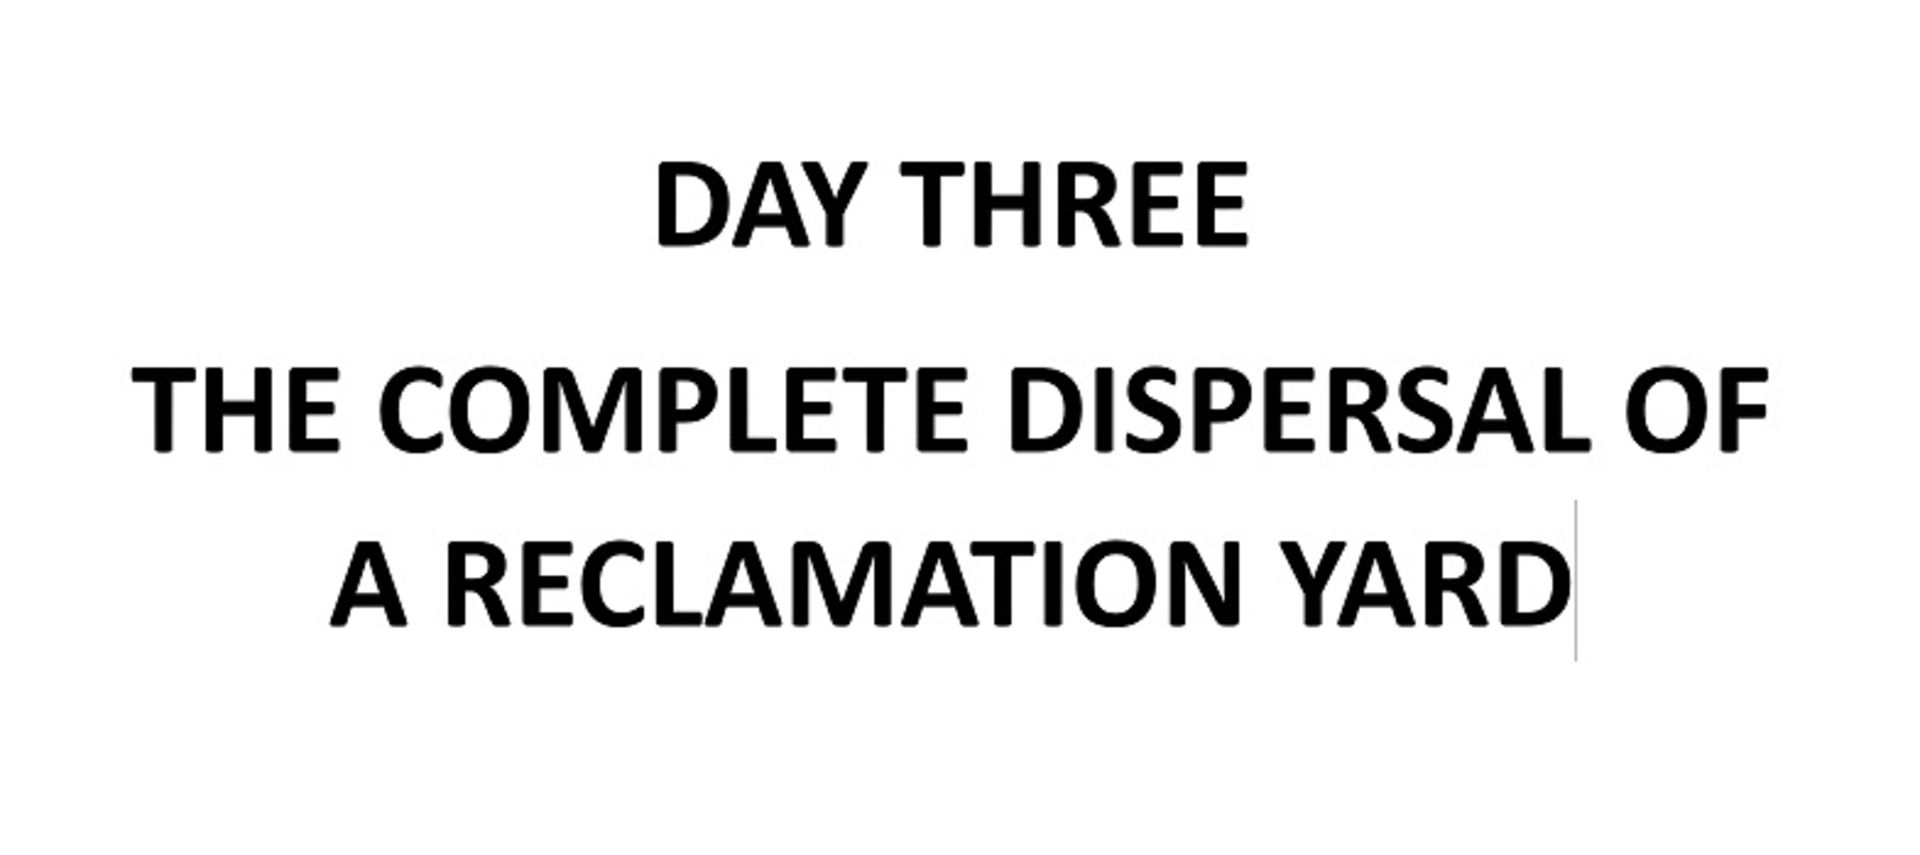 DAY THREE - A COMPLETE DISPERSAL OF A RECLAMATION YARD PART 1 (PART 2 WILL BE HELD ON FRIDAY 14TH